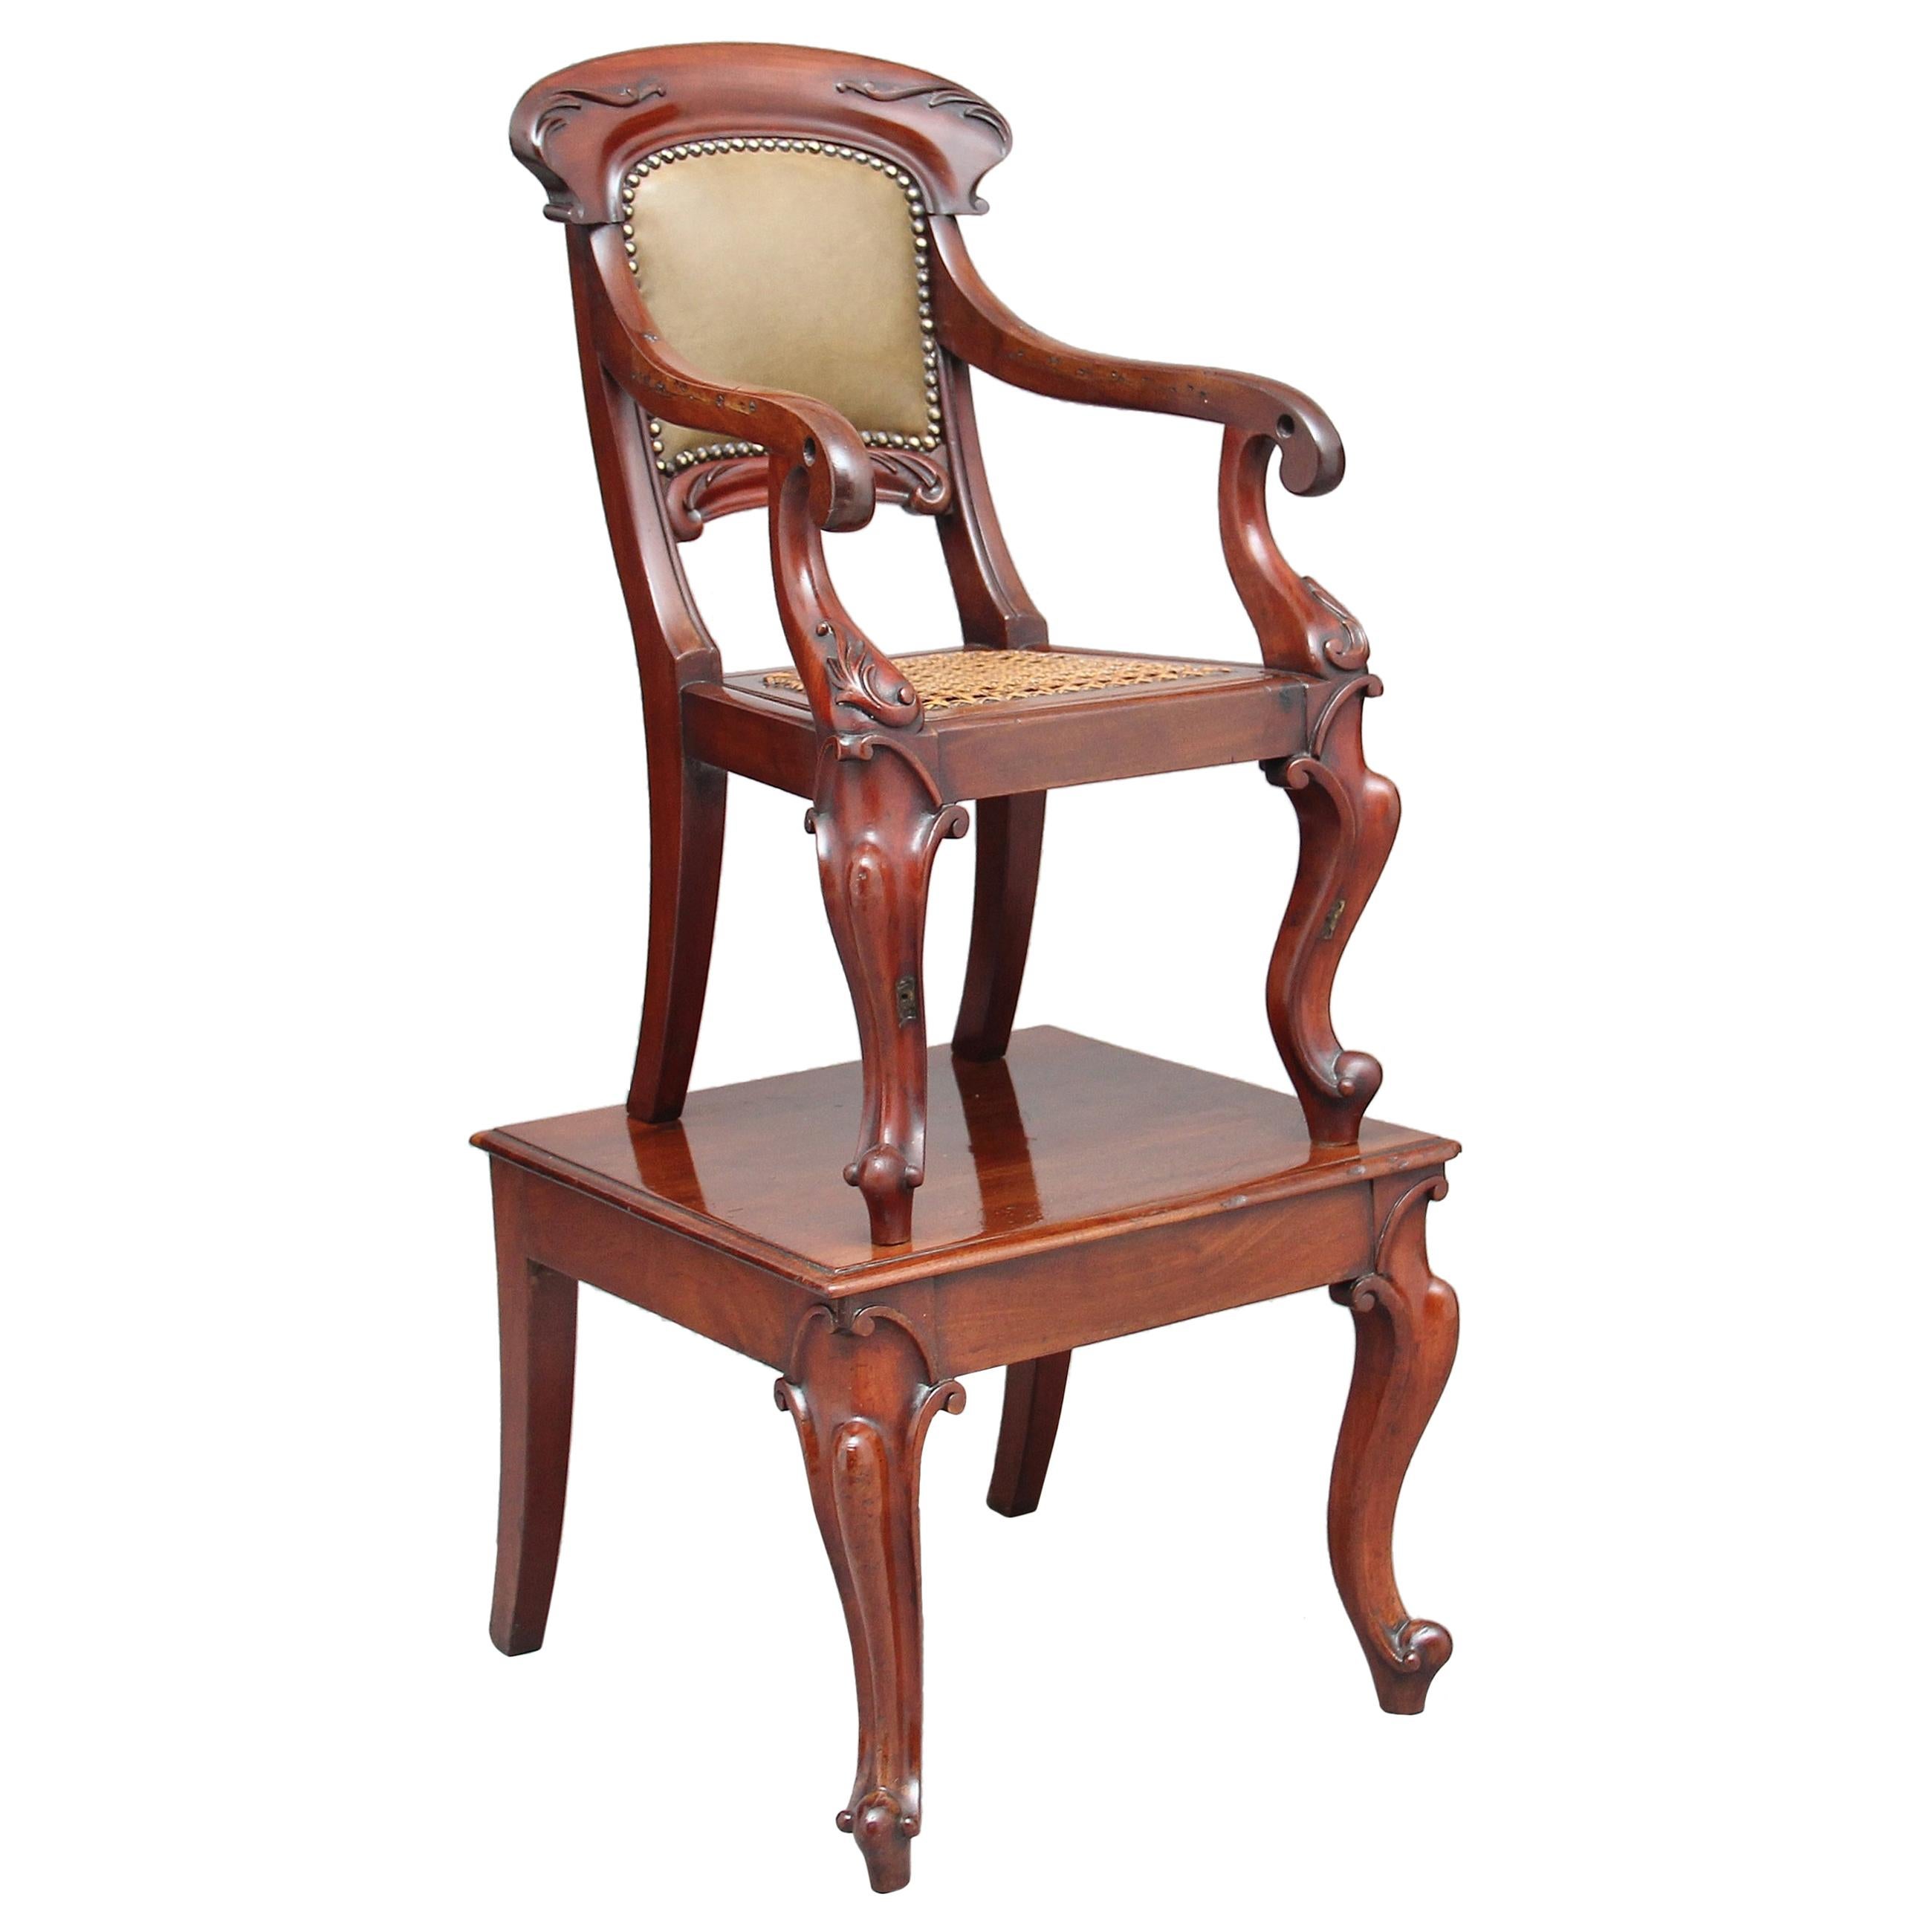 19th Century Mahogany Child's Chair on Stand